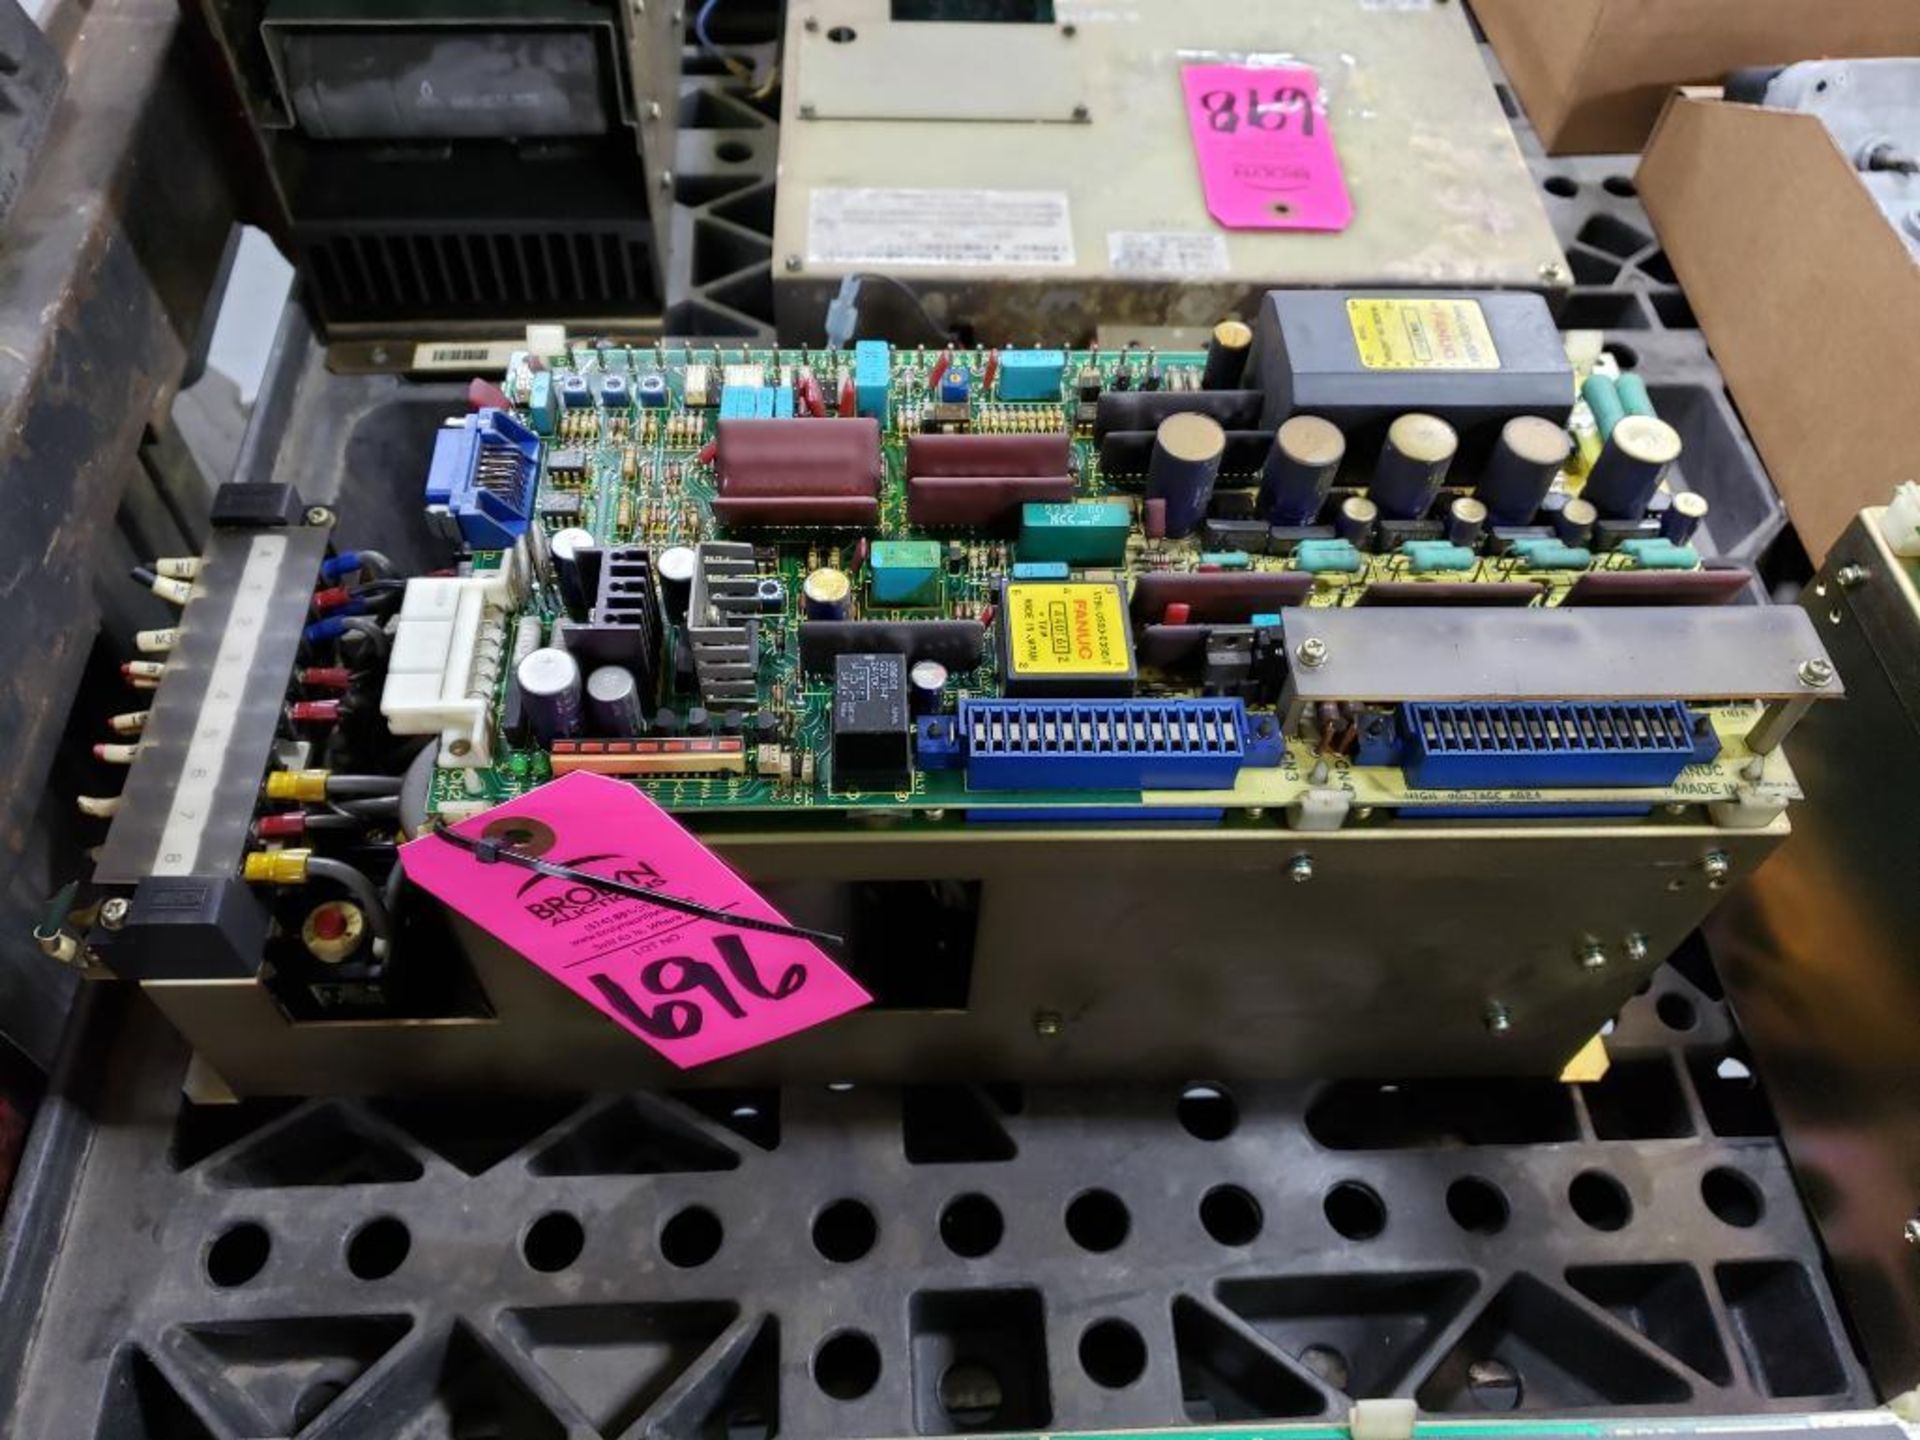 Fanuc velocity control unit model A06B-6047-H003. Pulled from working machine.